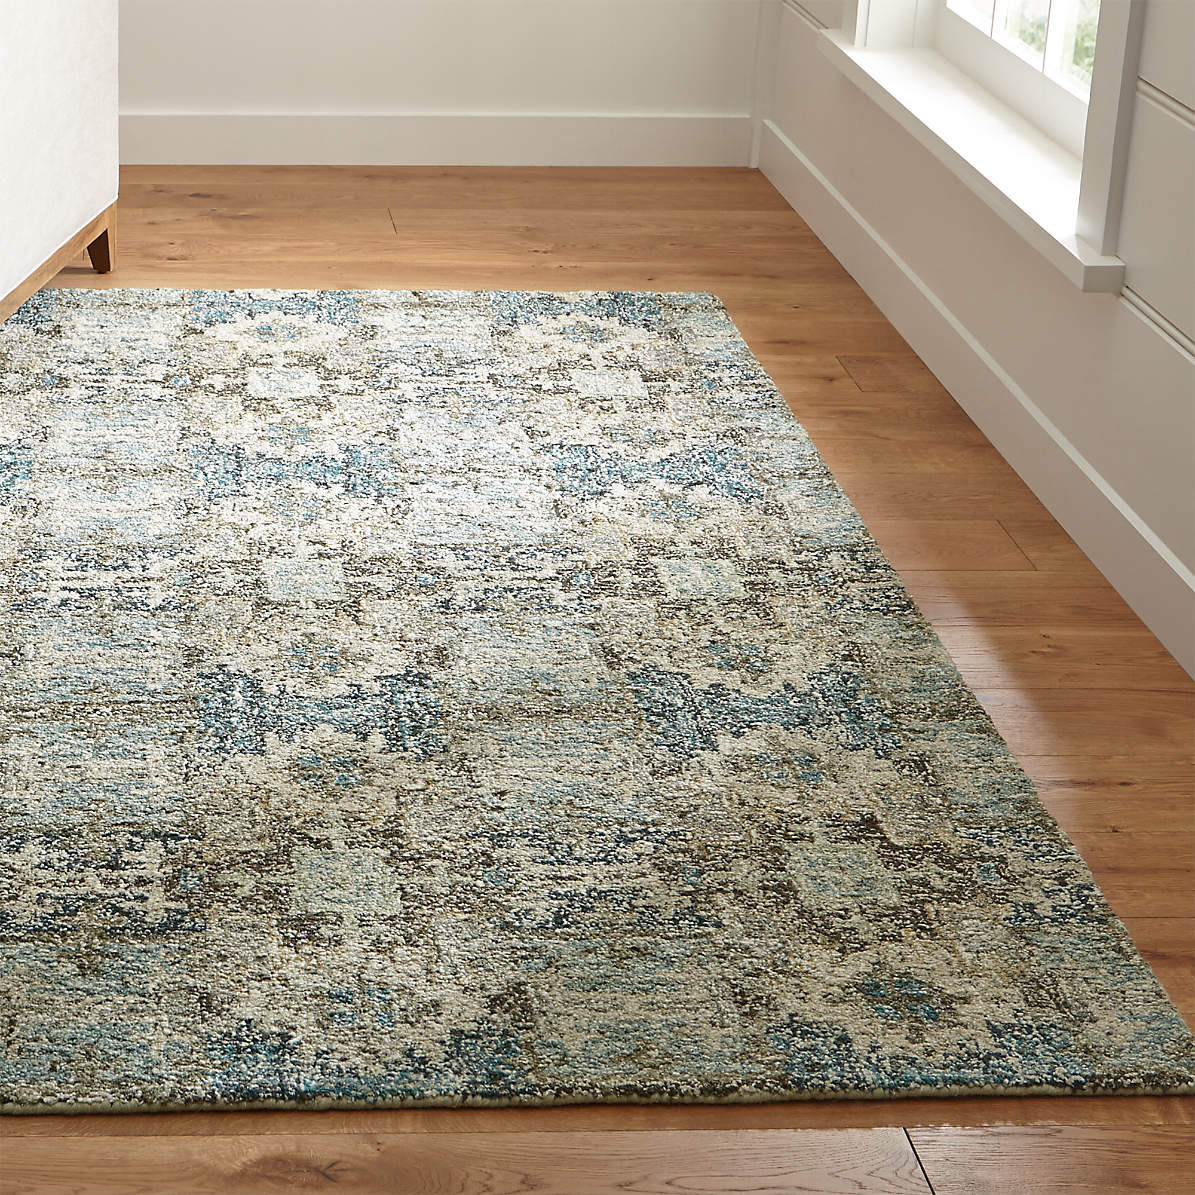 Alvarez Mineral Blue Hand Tufted Rug, Crate And Barrel Rugs